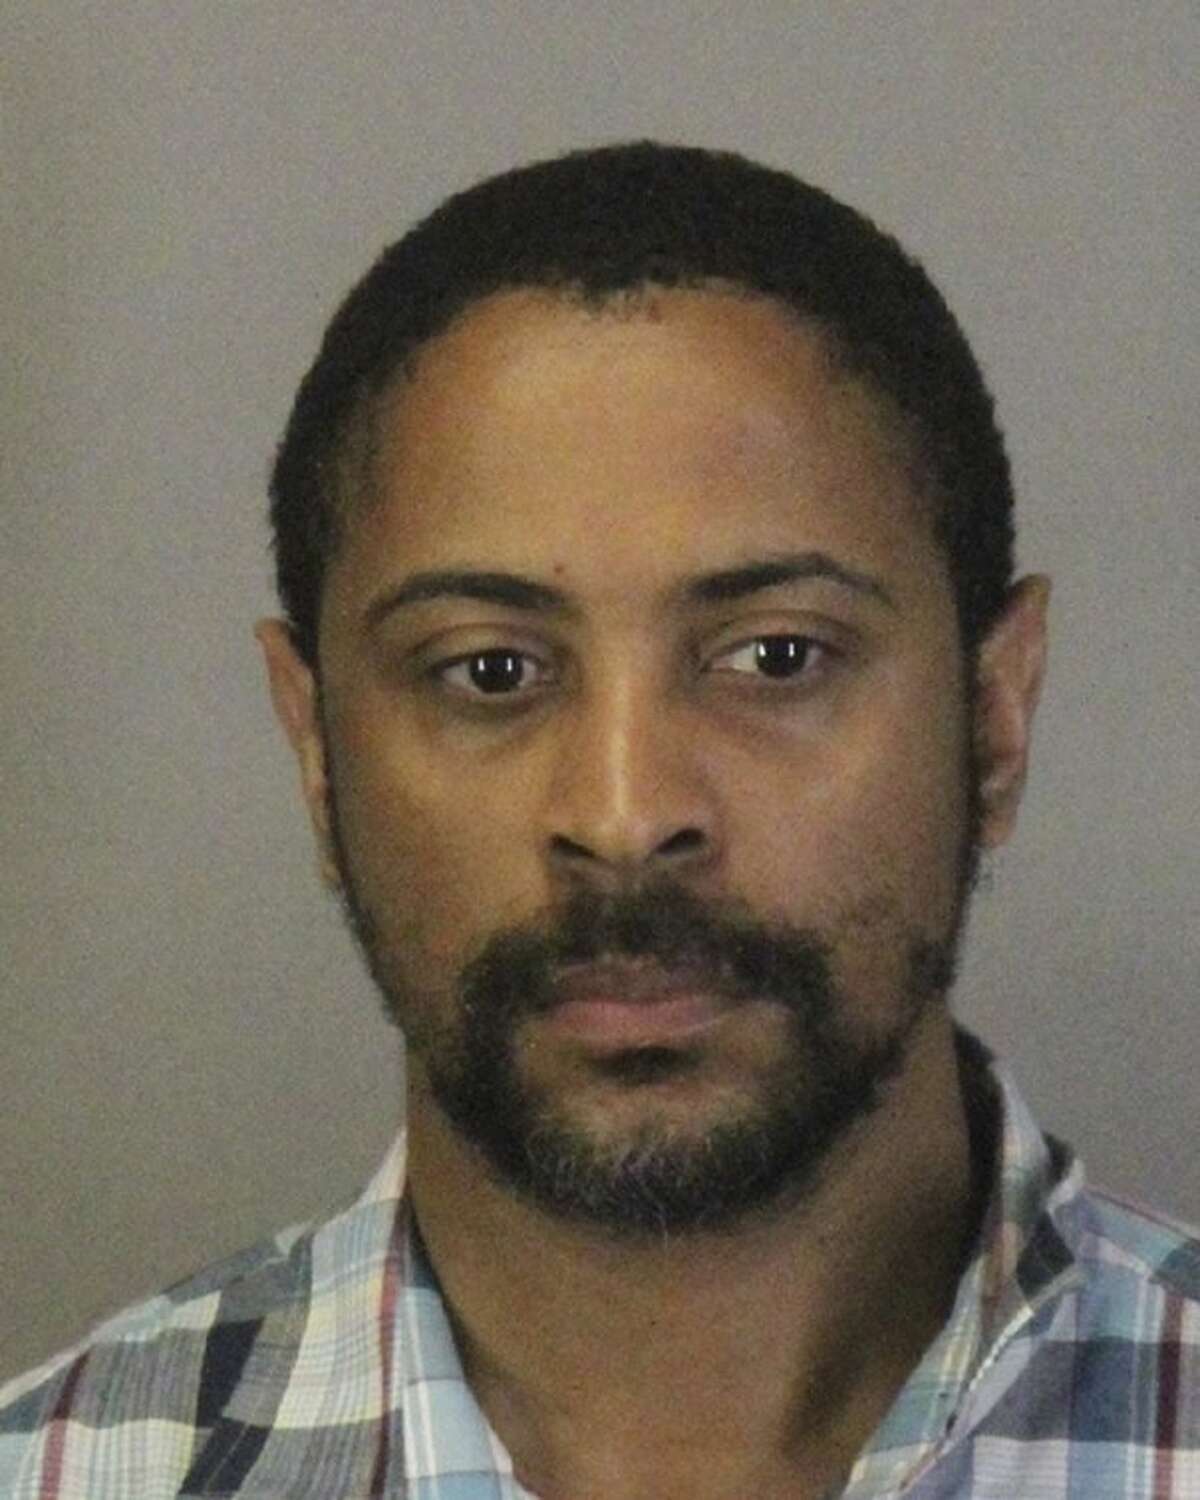 This photo released Wednesday, April 24, 2019, by the Sunnyvale Department of Public Safety shows Isaiah Joel Peoples. Police in Northern California have identified the man arrested after he allegedly deliberately plowed into a group of people. The Sunnyvale Department of Public Safety says 34-year-old Peoples, of Sunnyvale, Calif., was arrested Tuesday. (Sunnyvale Department of Public Safety via AP)